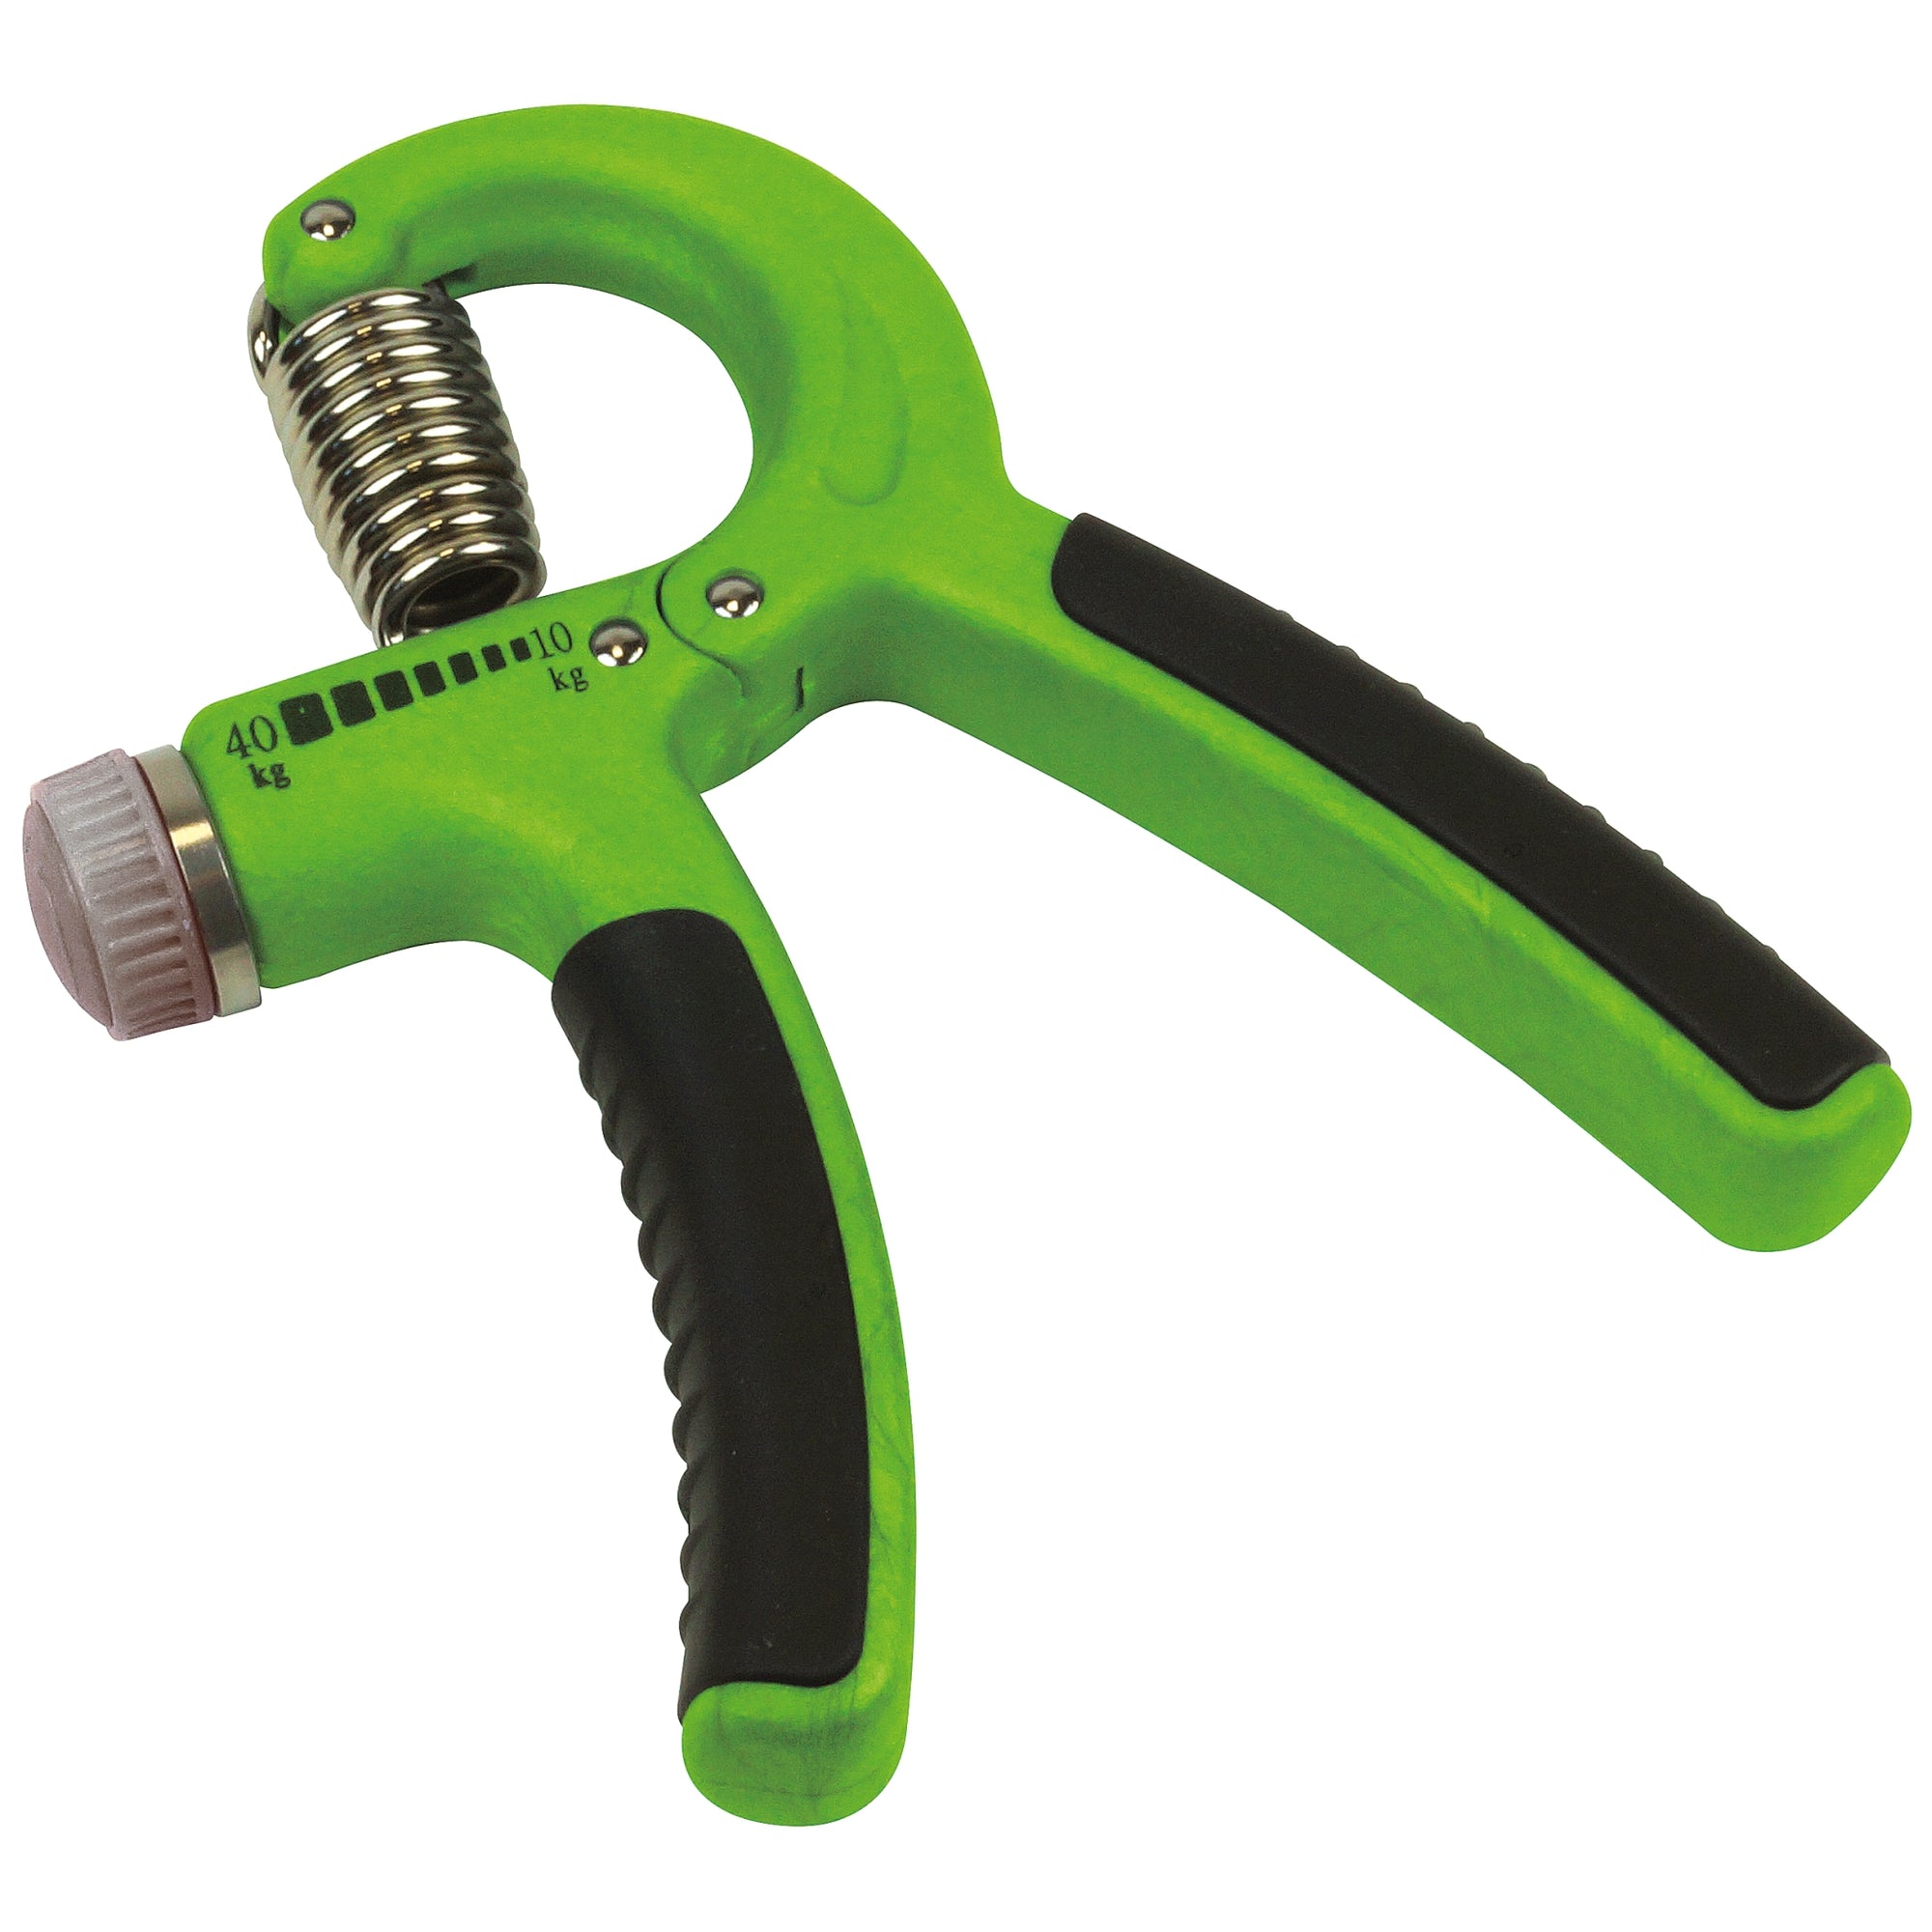 UFE Adjustable Spring Grip in green with black grip sections